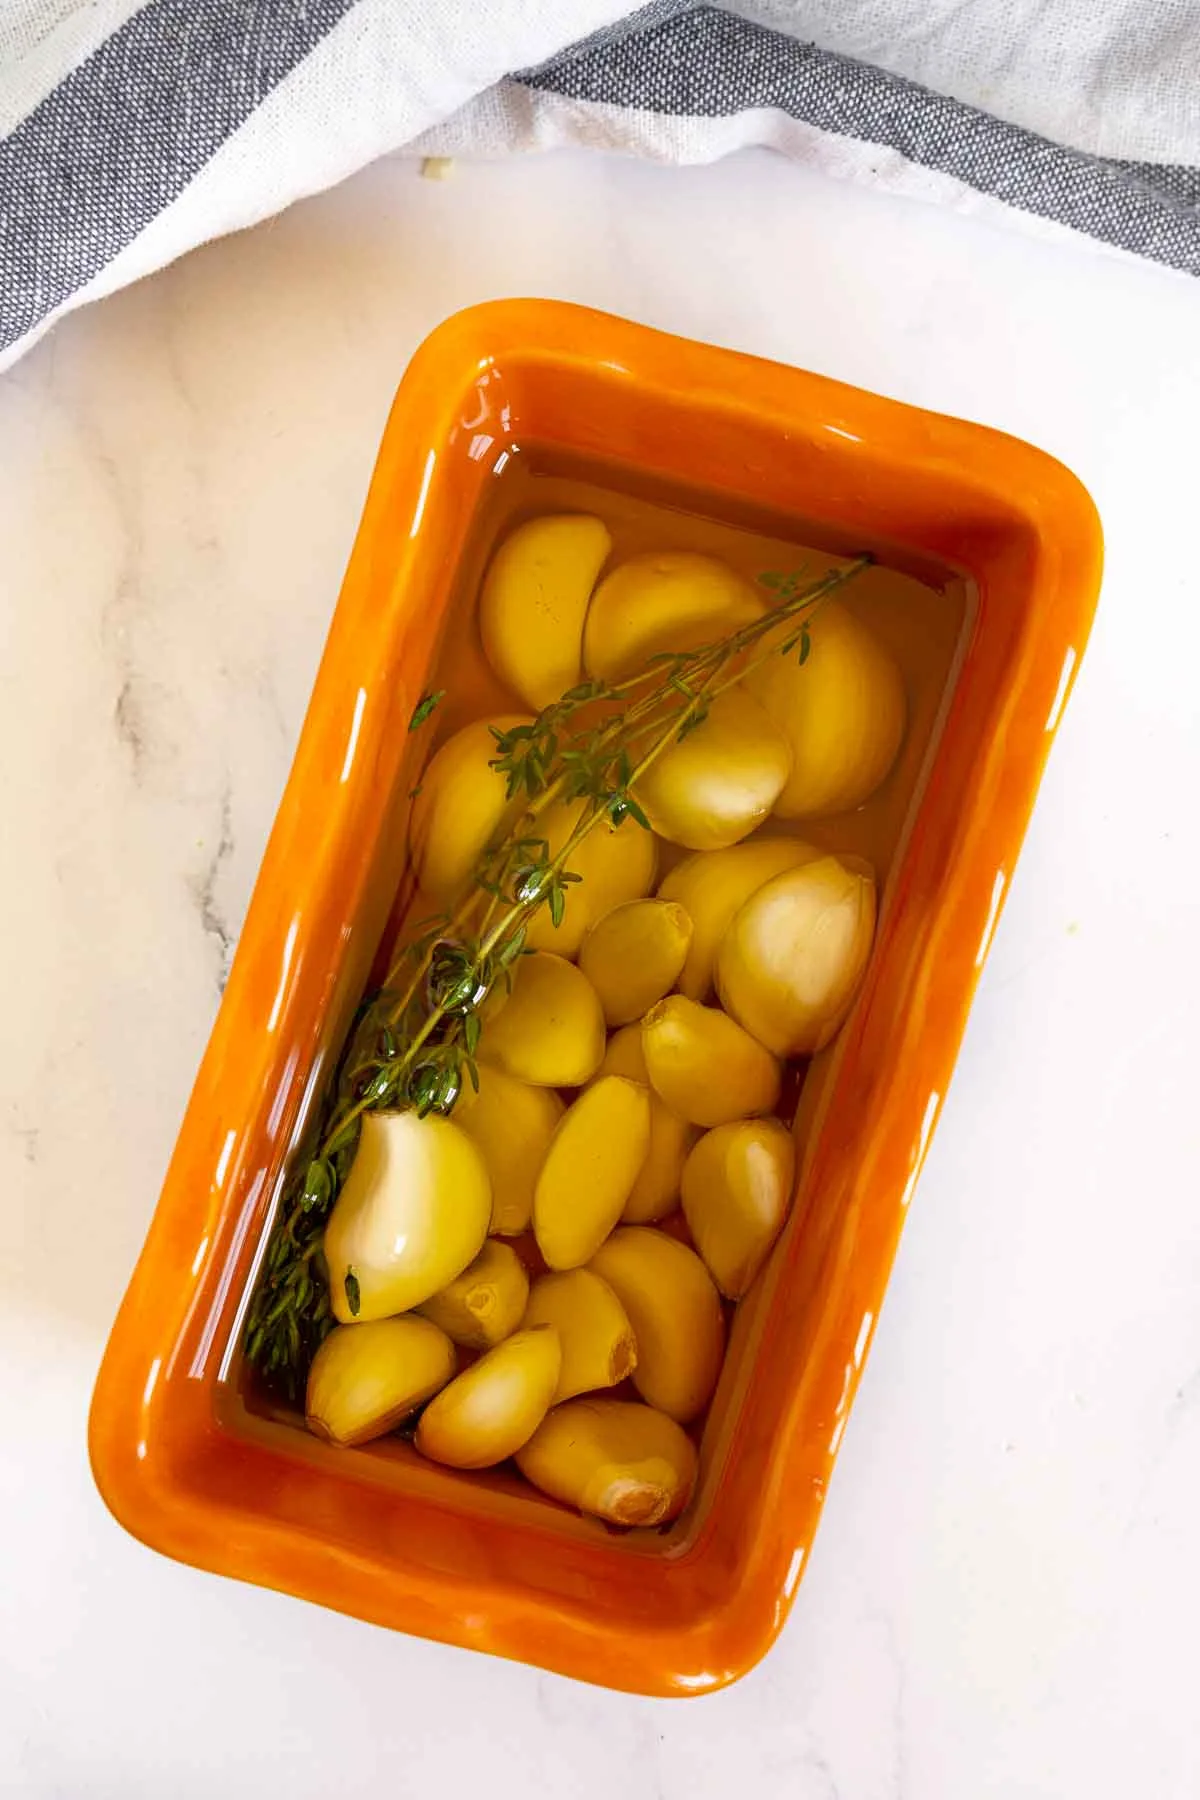 Garlic cloves, olive oil, and a thyme sprig in a small oven-safe container